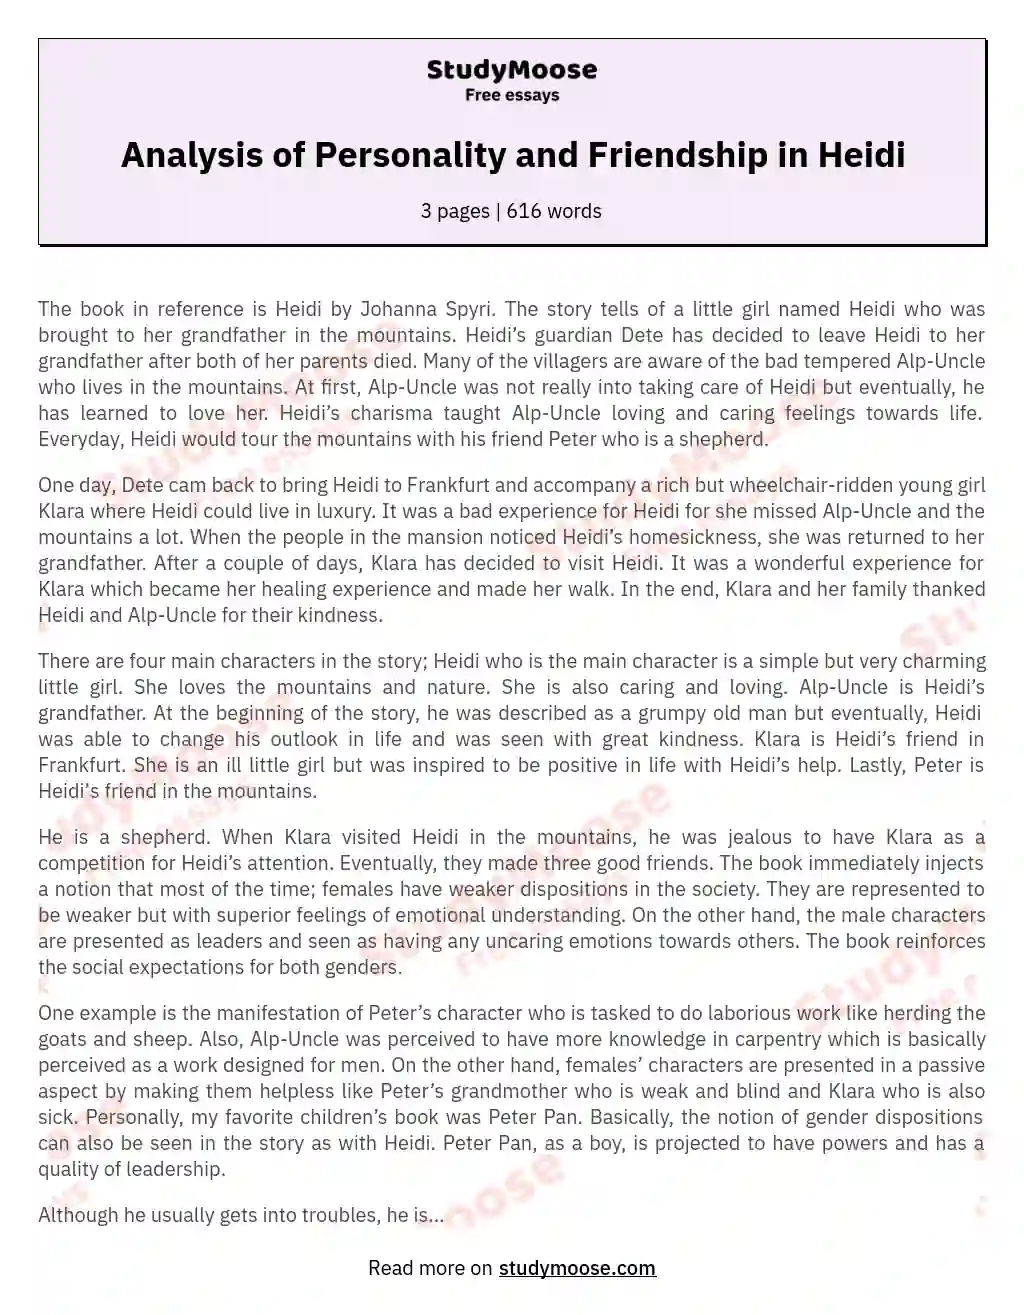 Analysis of Personality and Friendship in Heidi essay